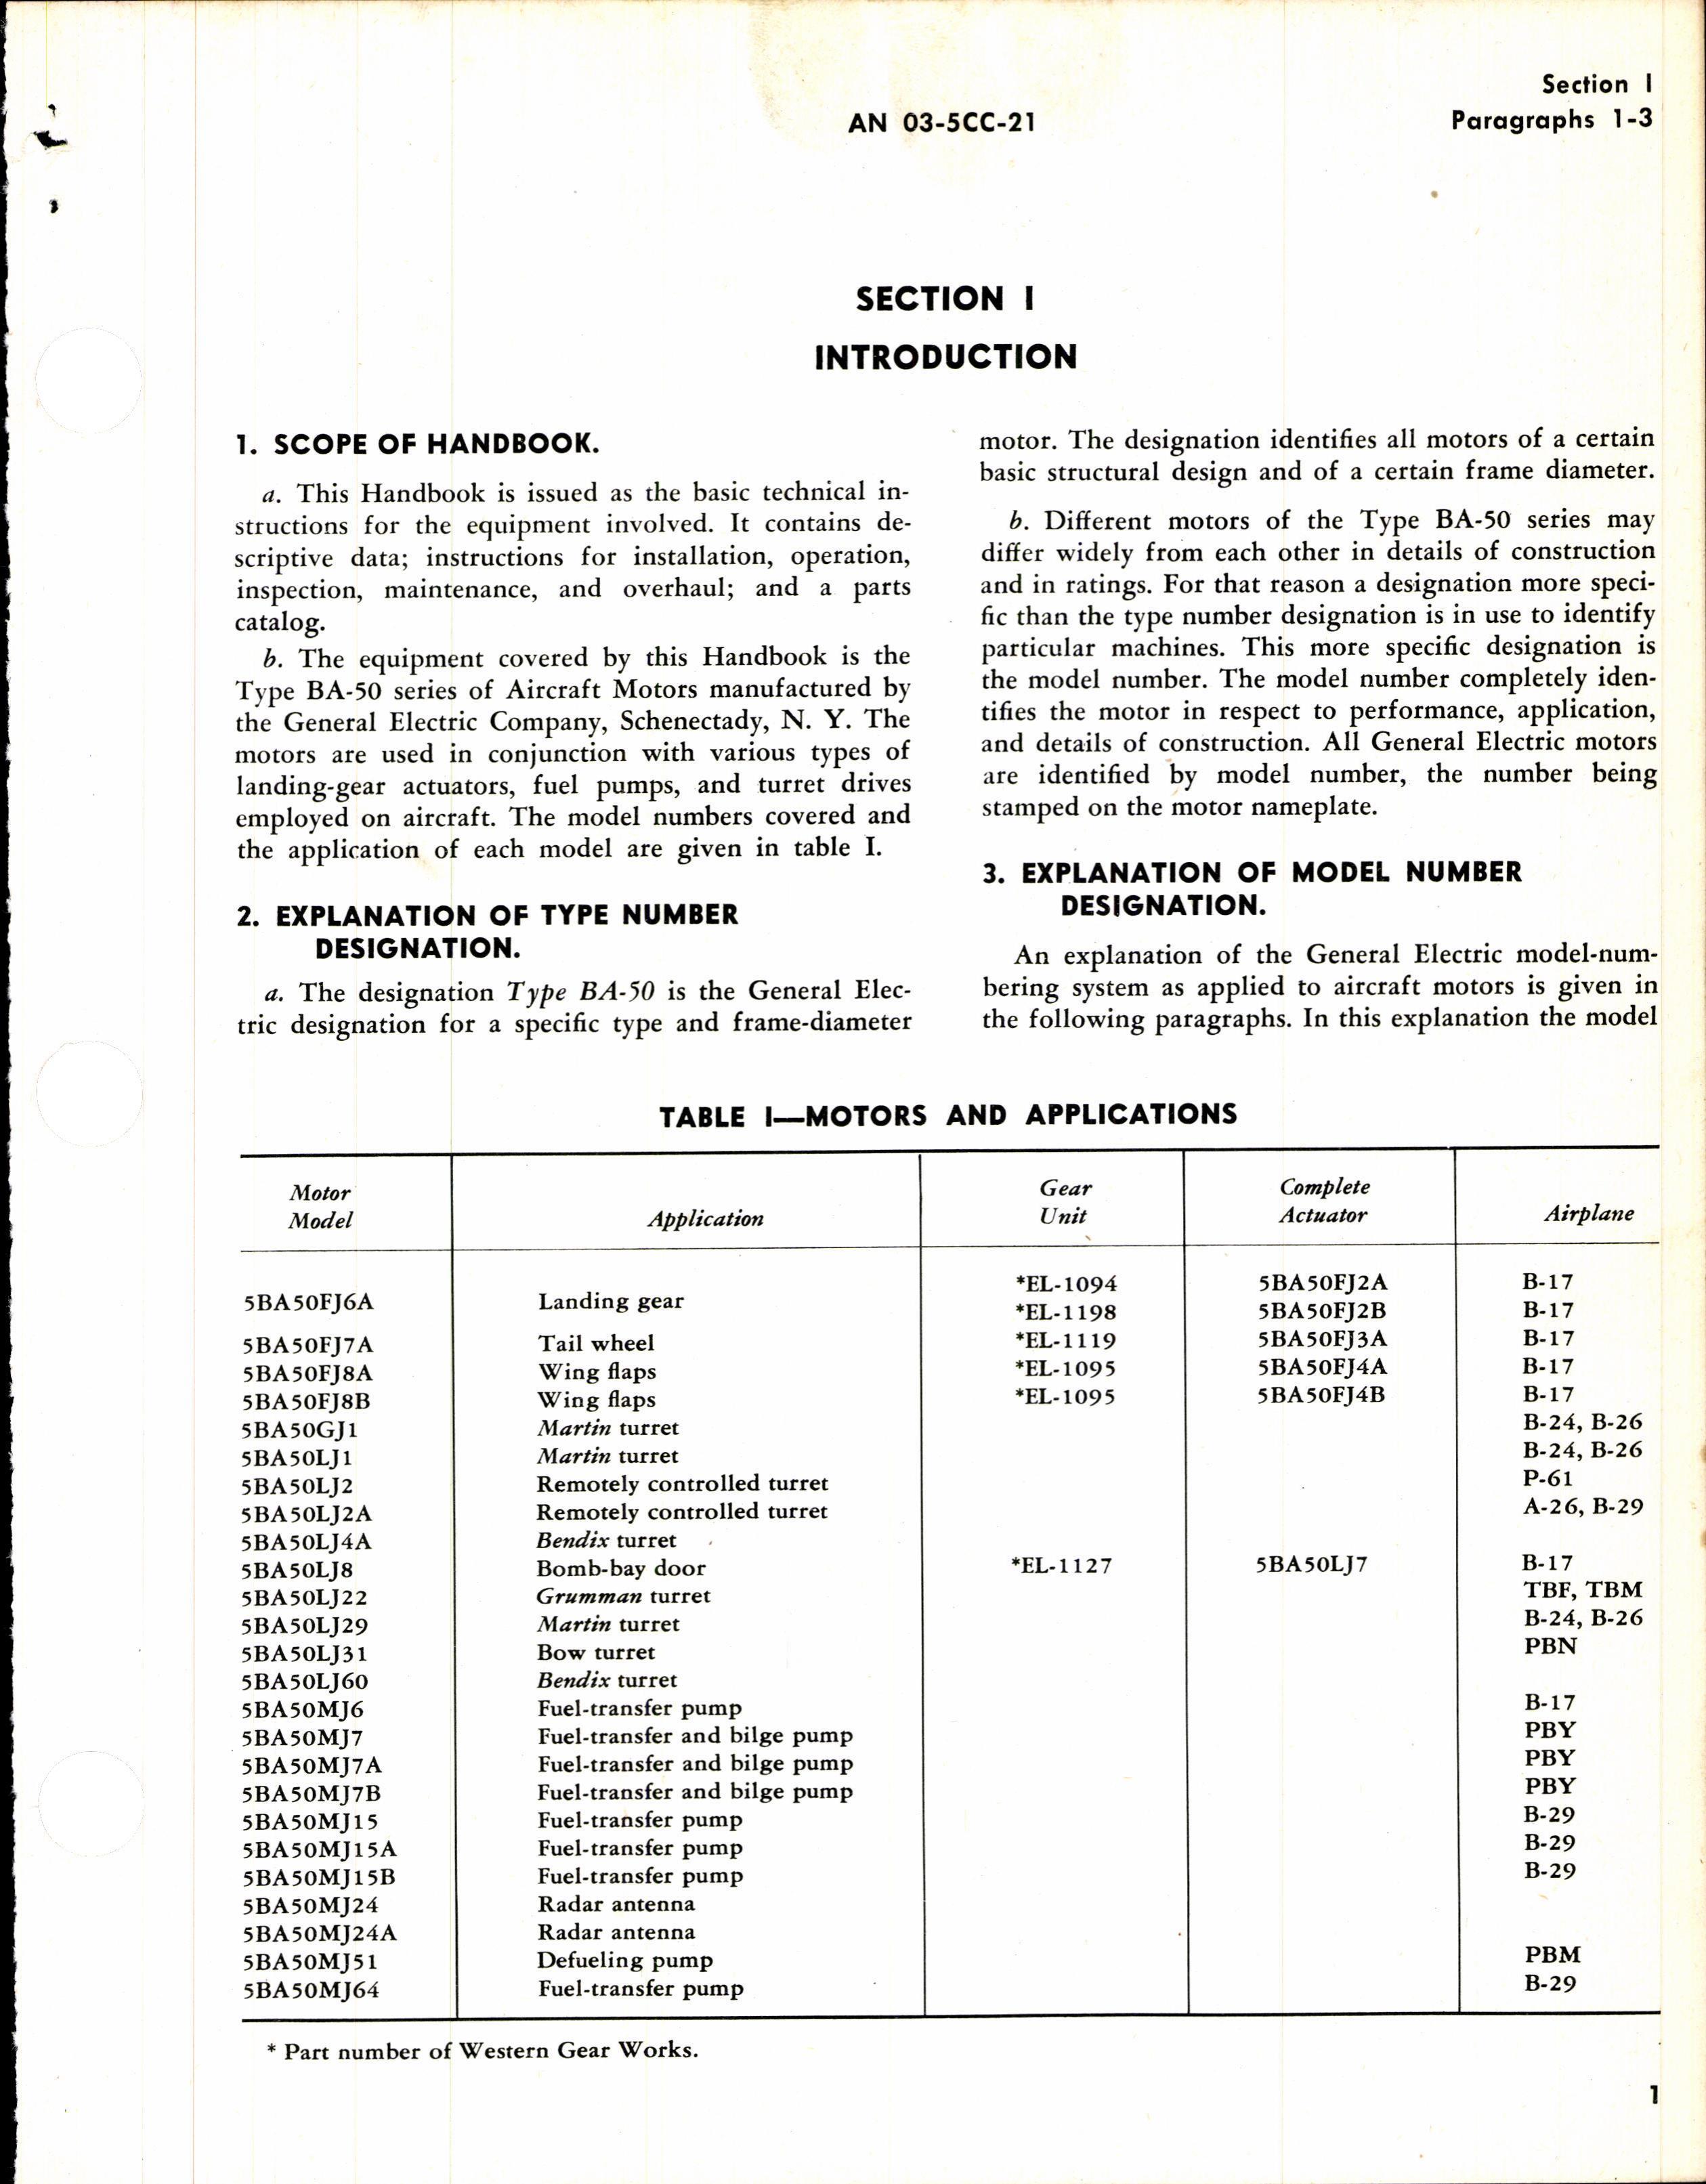 Sample page 3 from AirCorps Library document: HB of Instructions with Parts Catalog for Model 5BA50 Electric Motor